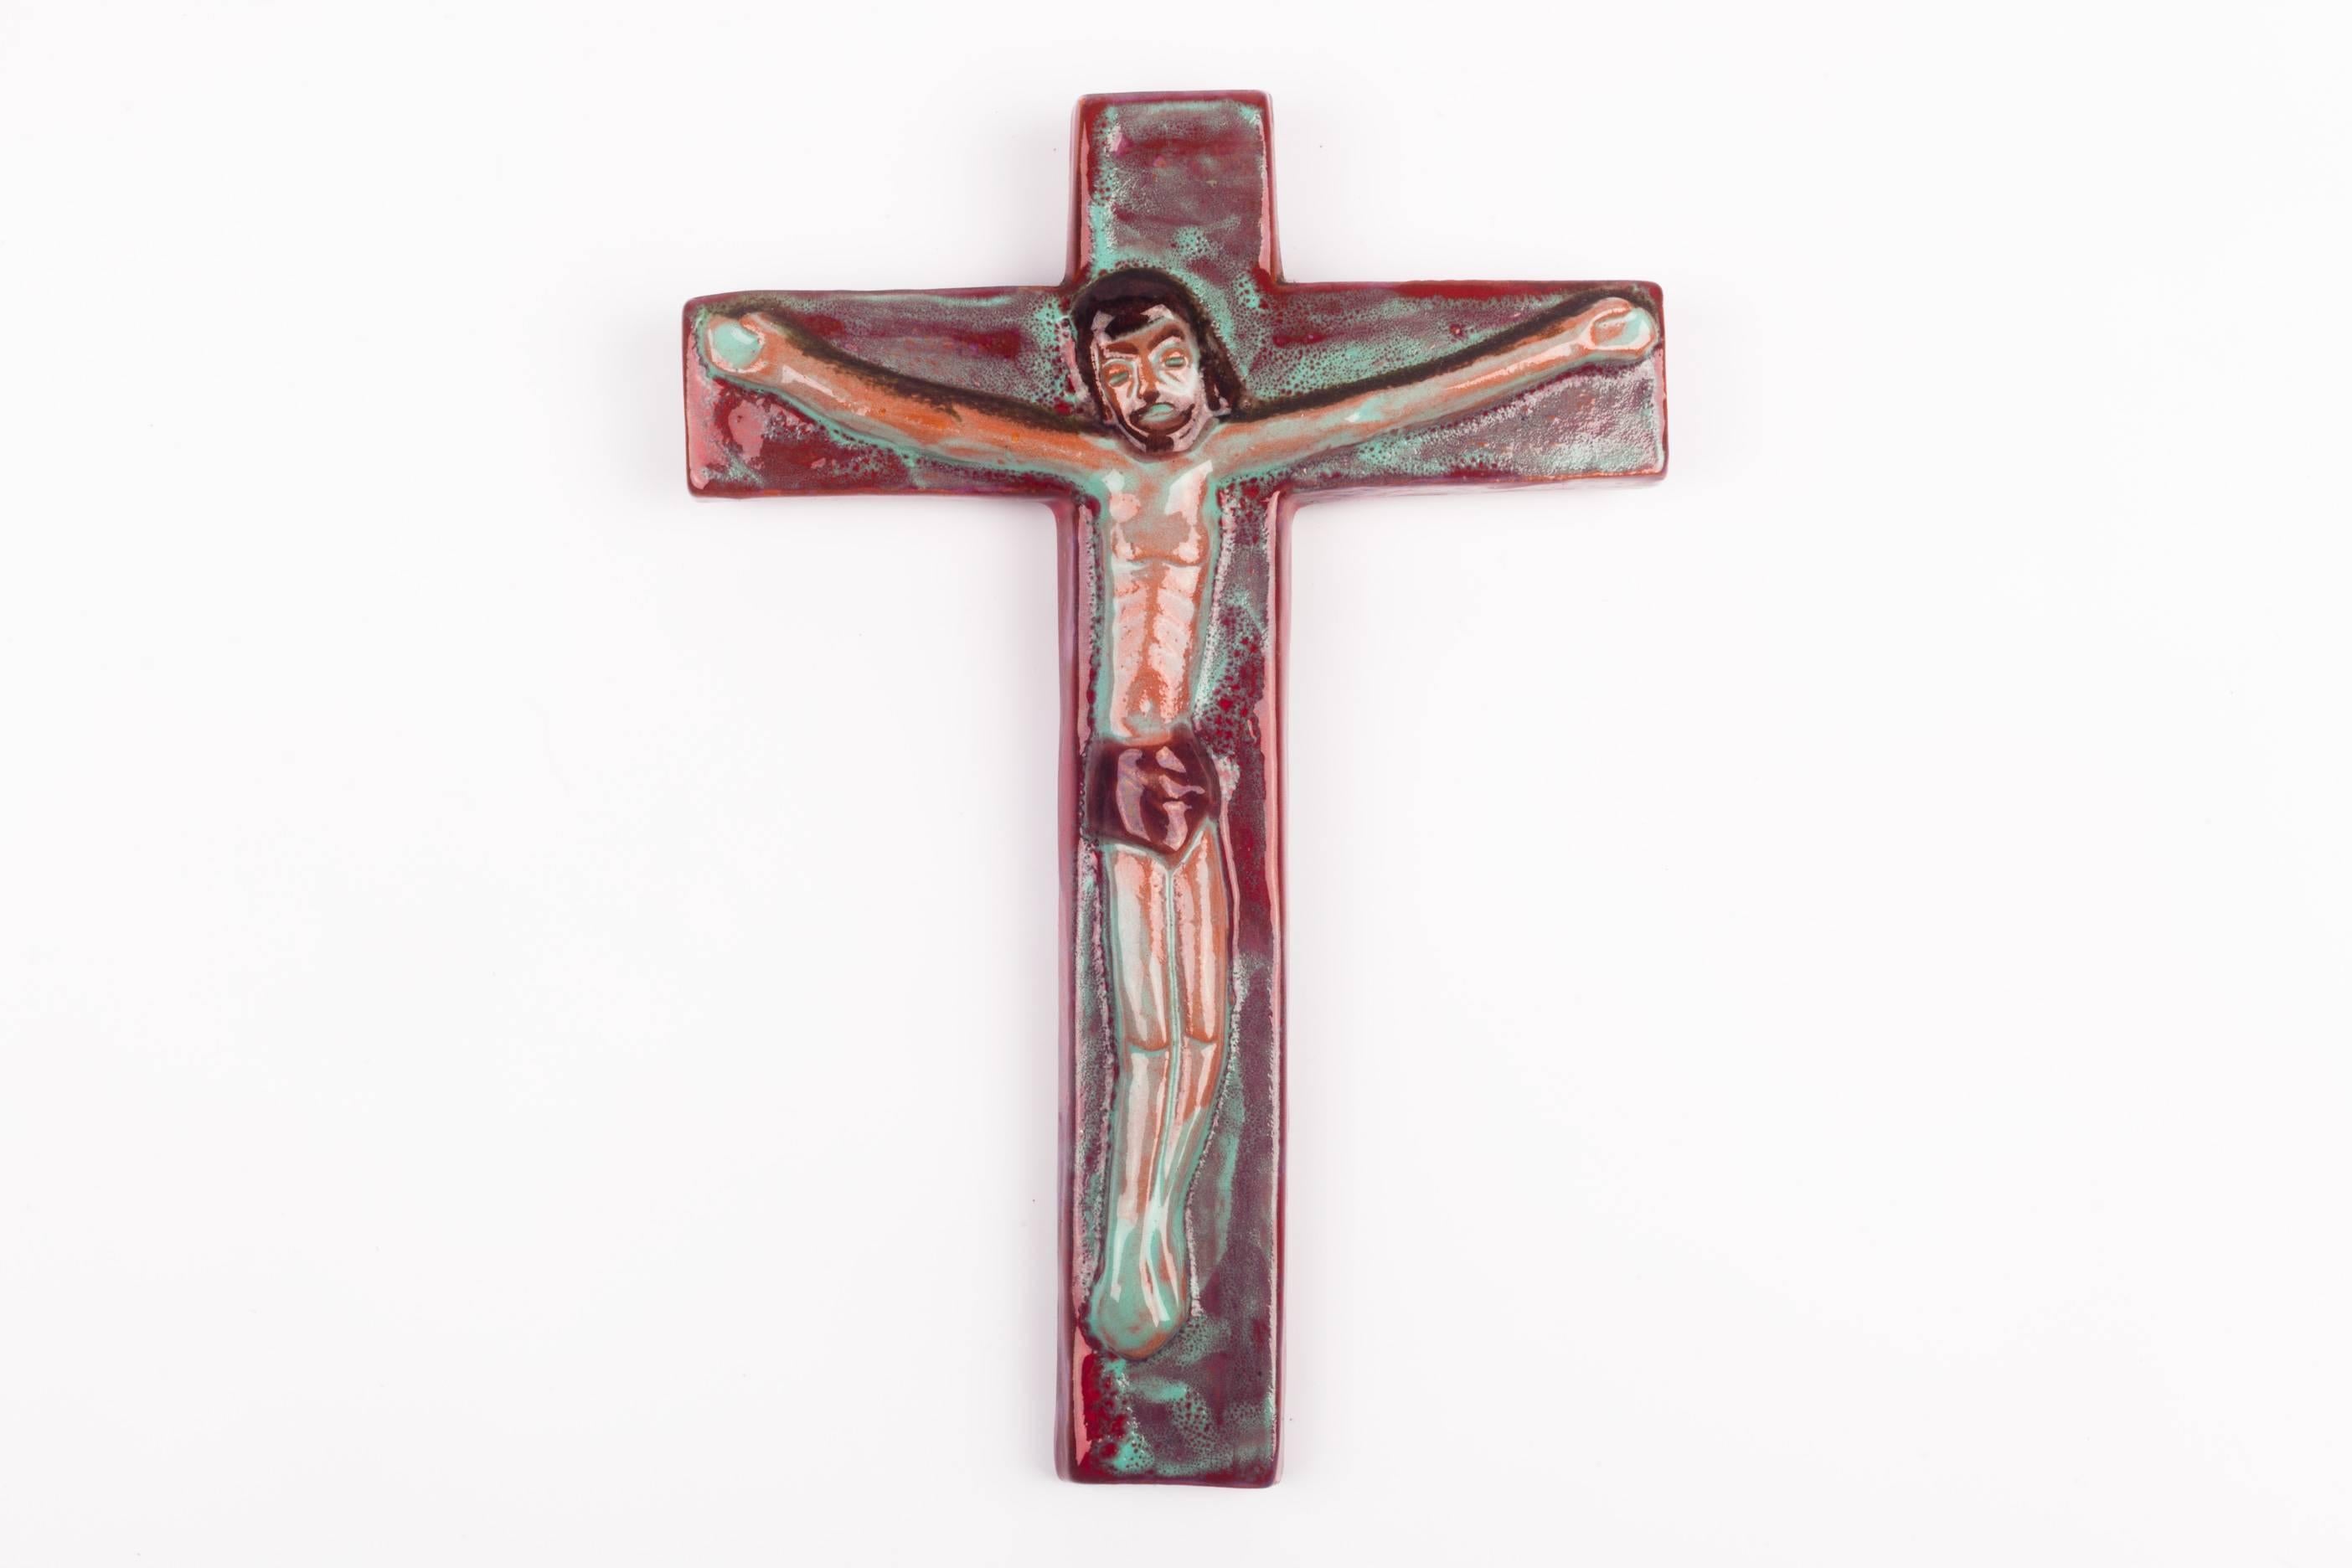 Post-Modern Wall Crucifix in Ceramic, Hand-Painted, Burgundy, Teal, Made in Belgium, 1960s